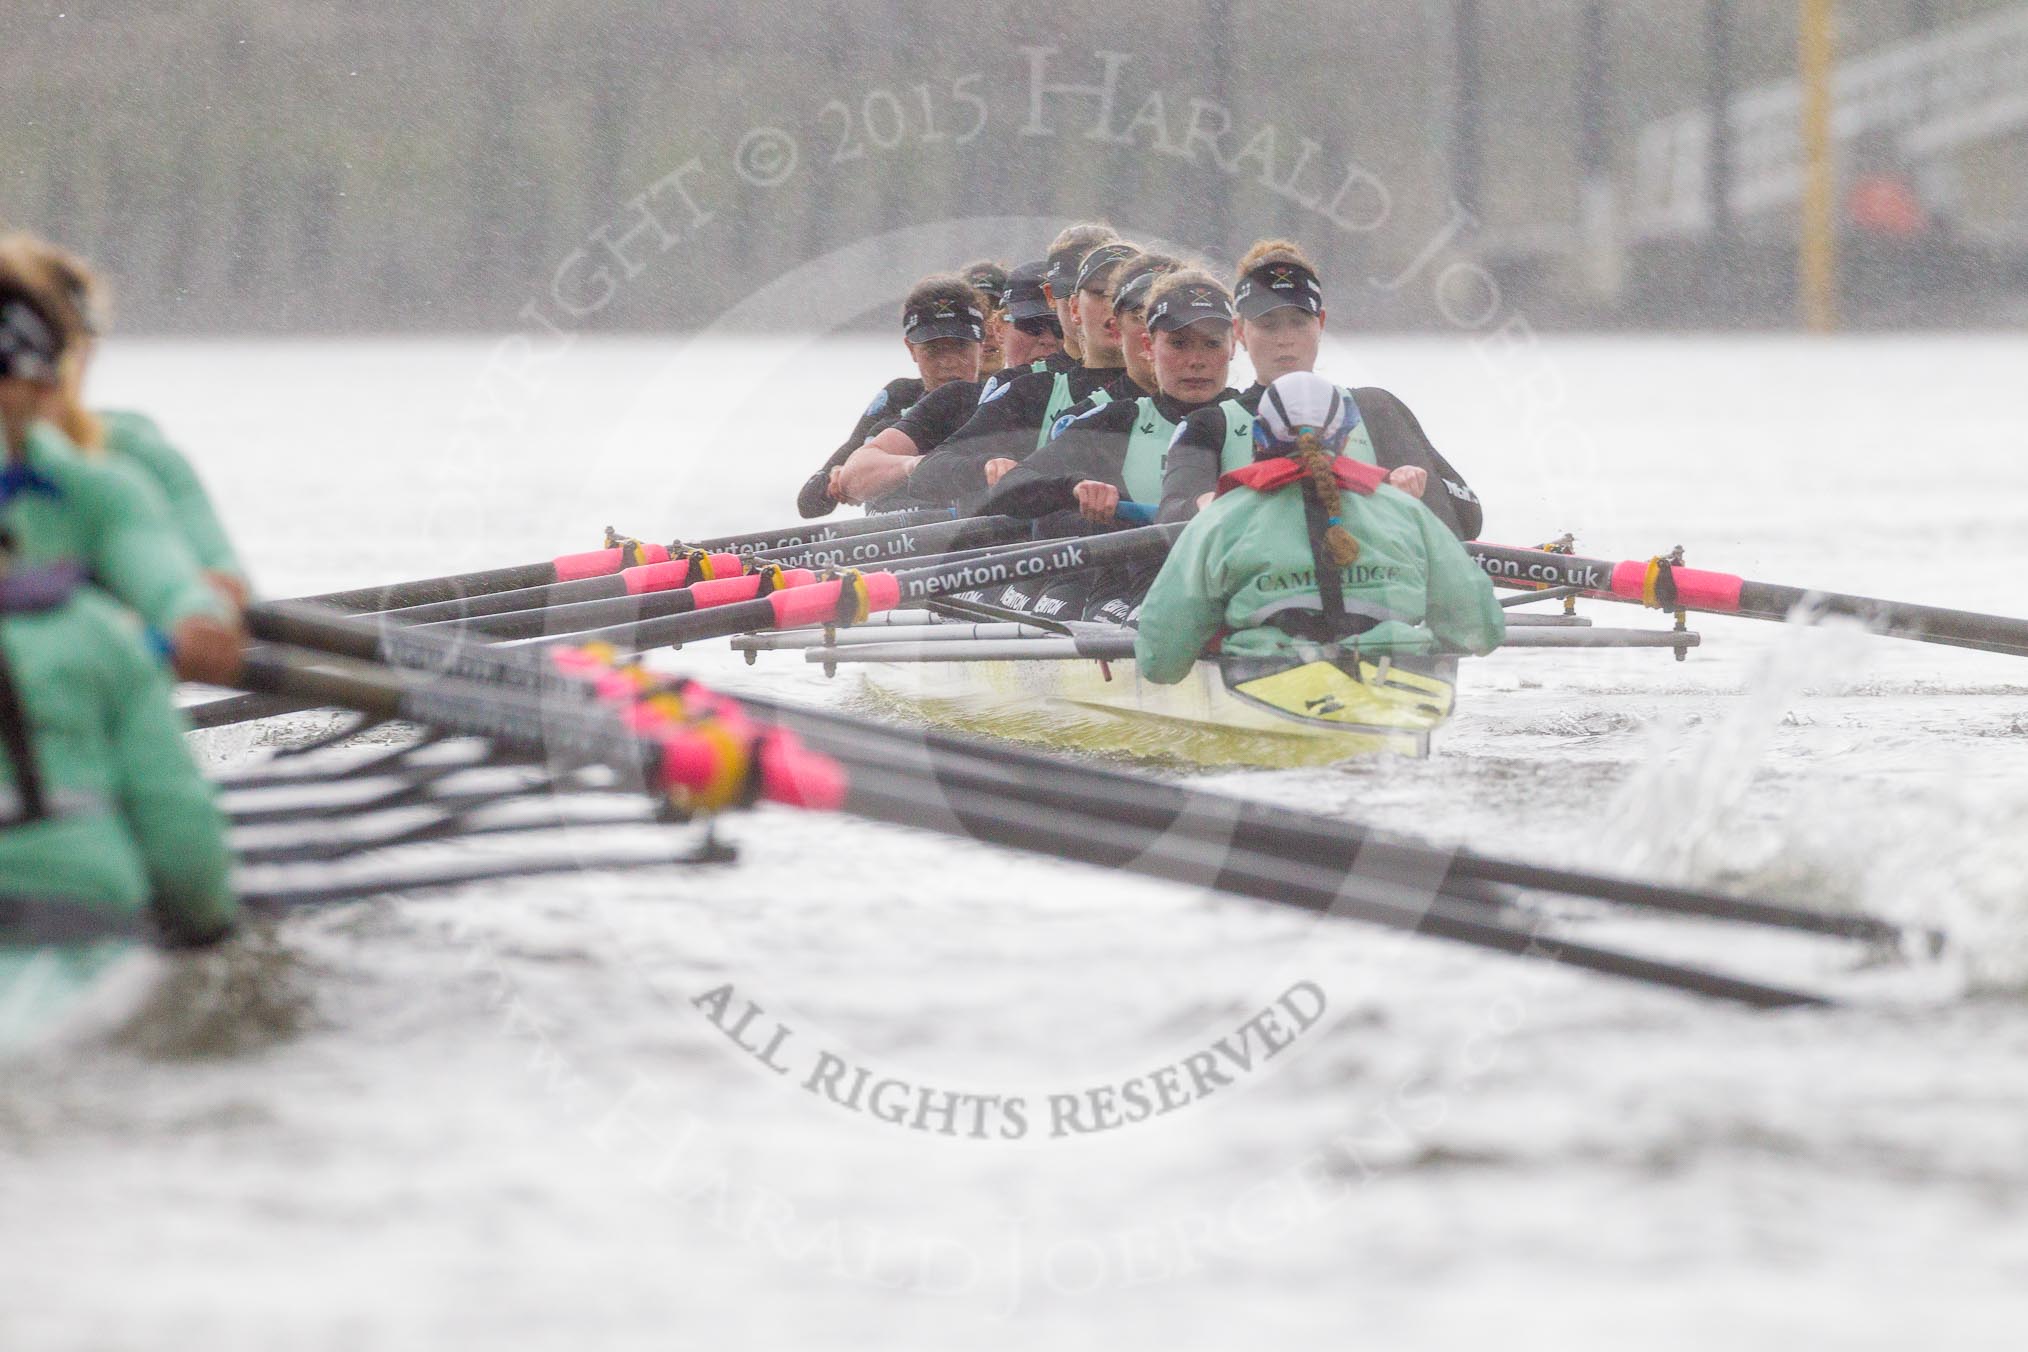 The Boat Race season 2016 - Women's Boat Race Trial Eights (CUWBC, Cambridge): "Twickenham" in the lead at Fulham Reach, seen behind the oars of "Tideway".
River Thames between Putney Bridge and Mortlake,
London SW15,

United Kingdom,
on 10 December 2015 at 11:08, image #72